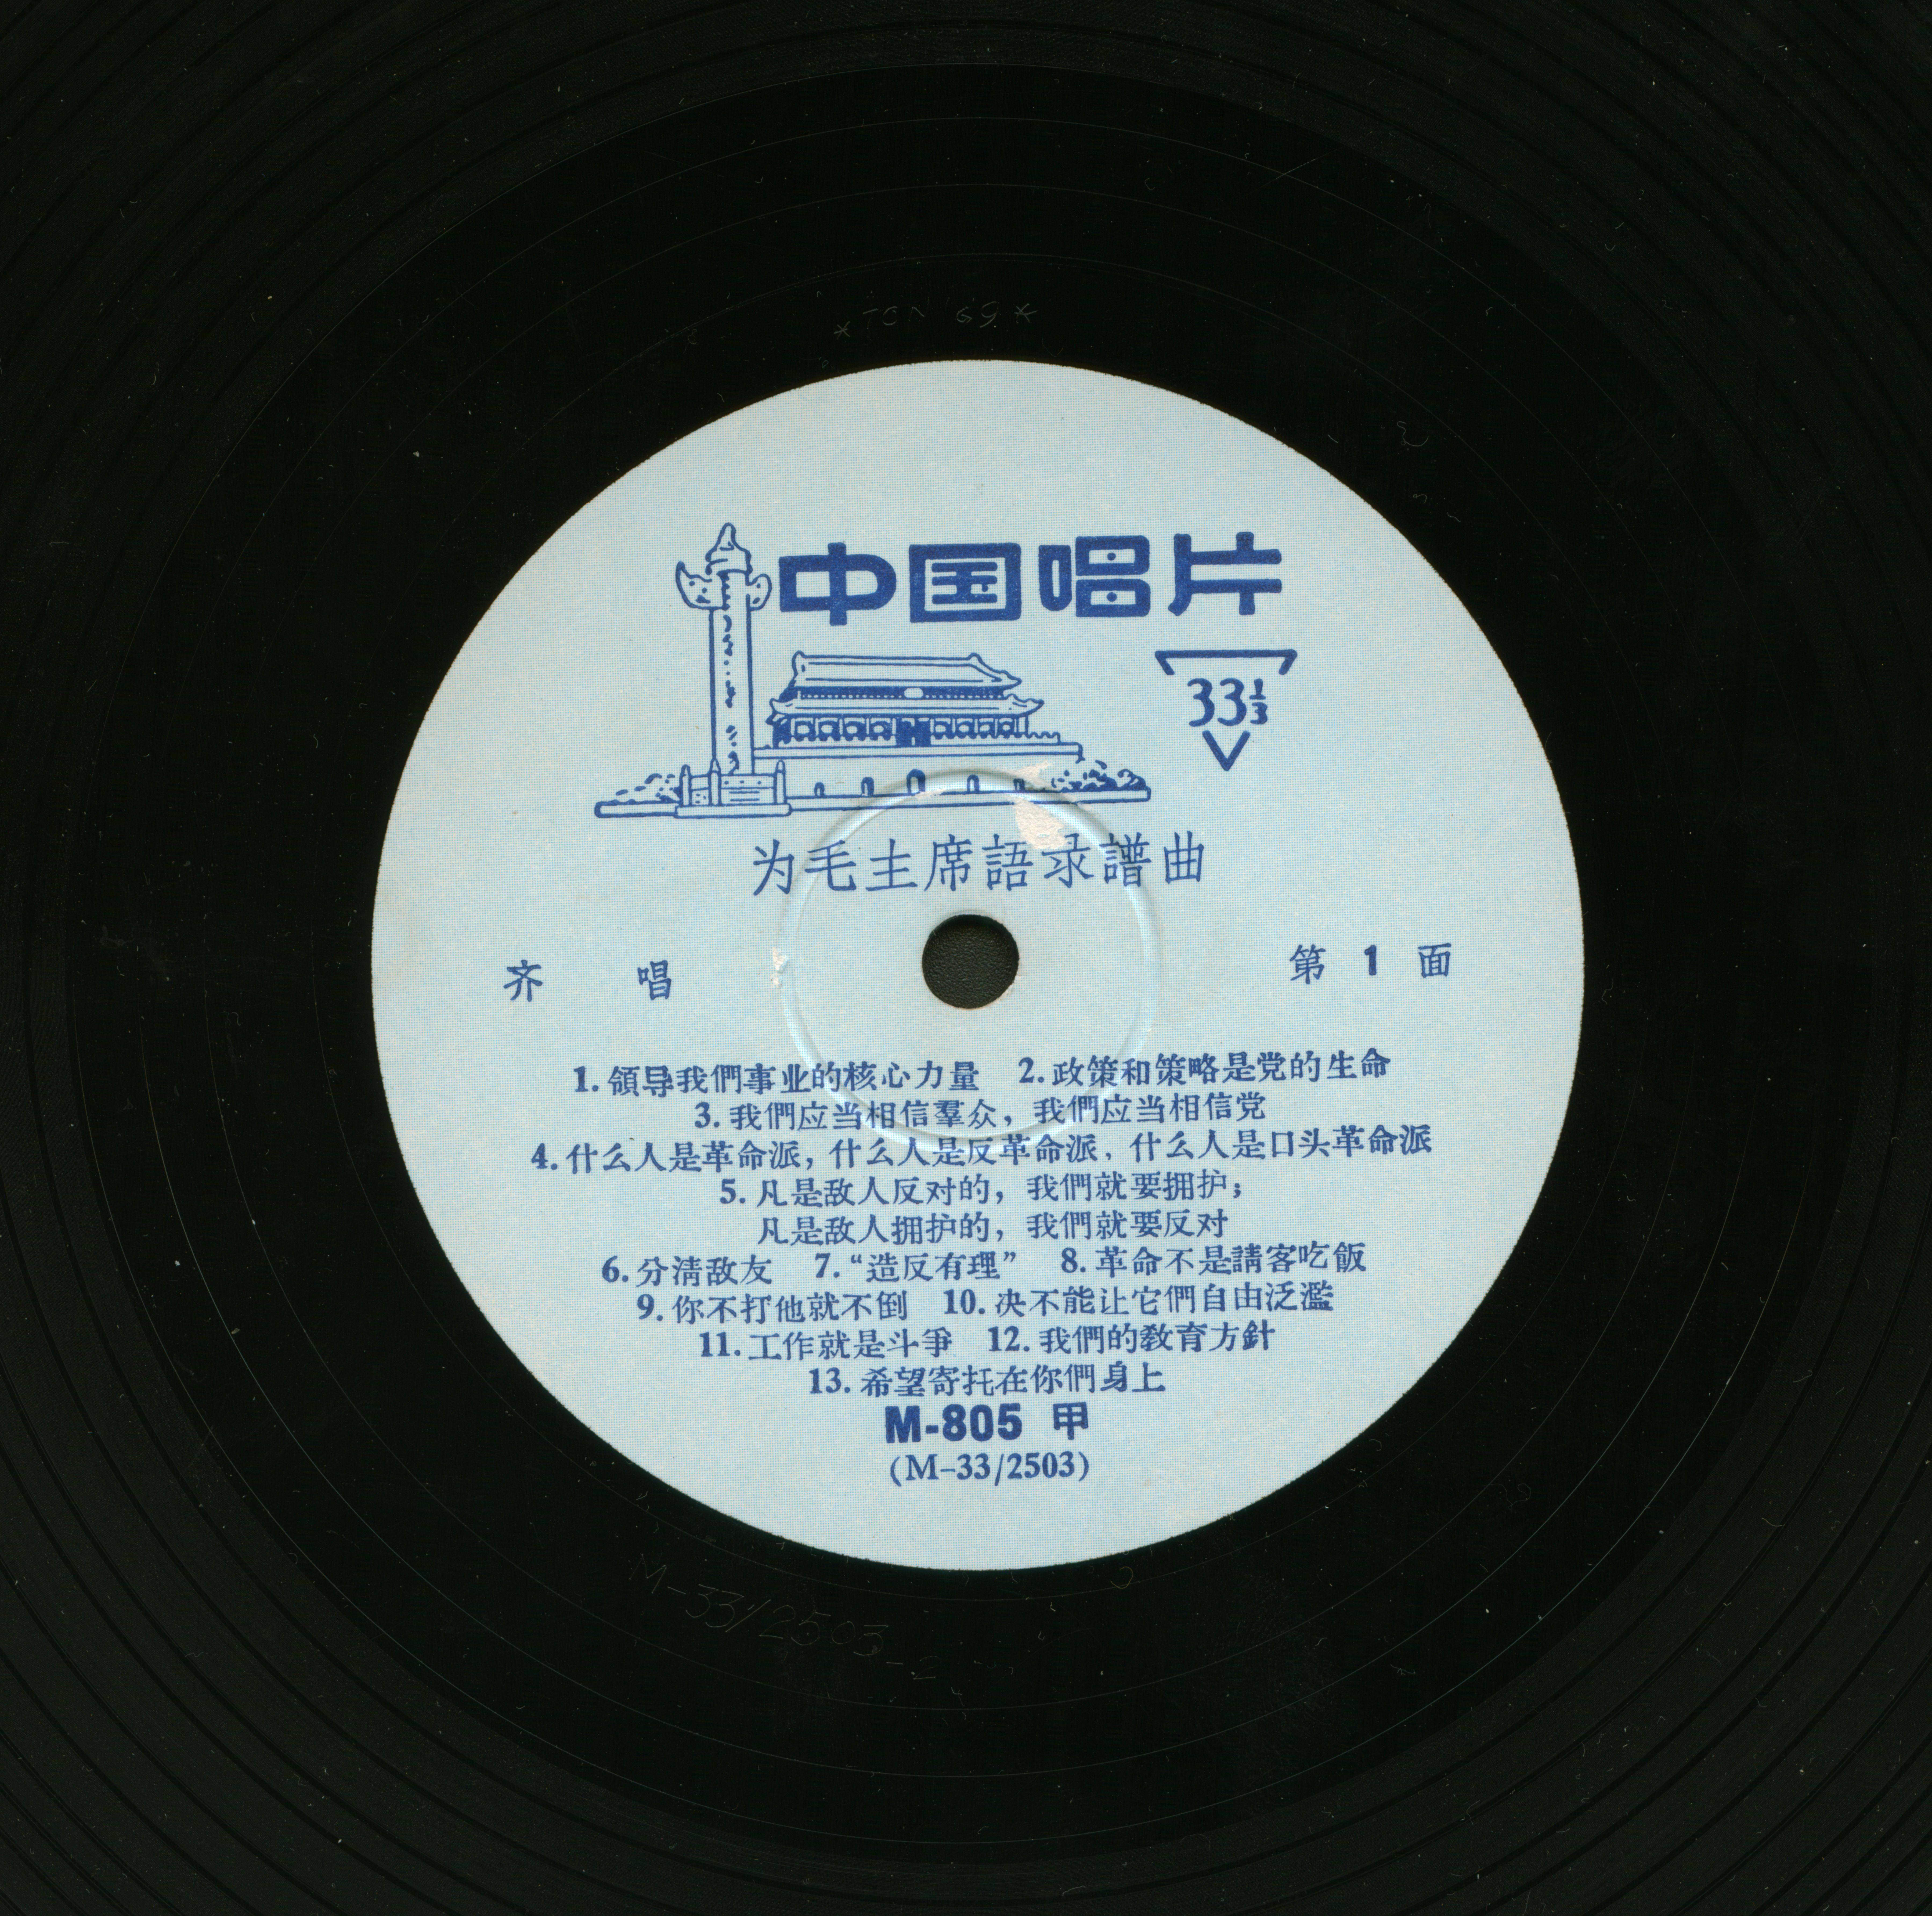 Quotations from chairman Mao set to music